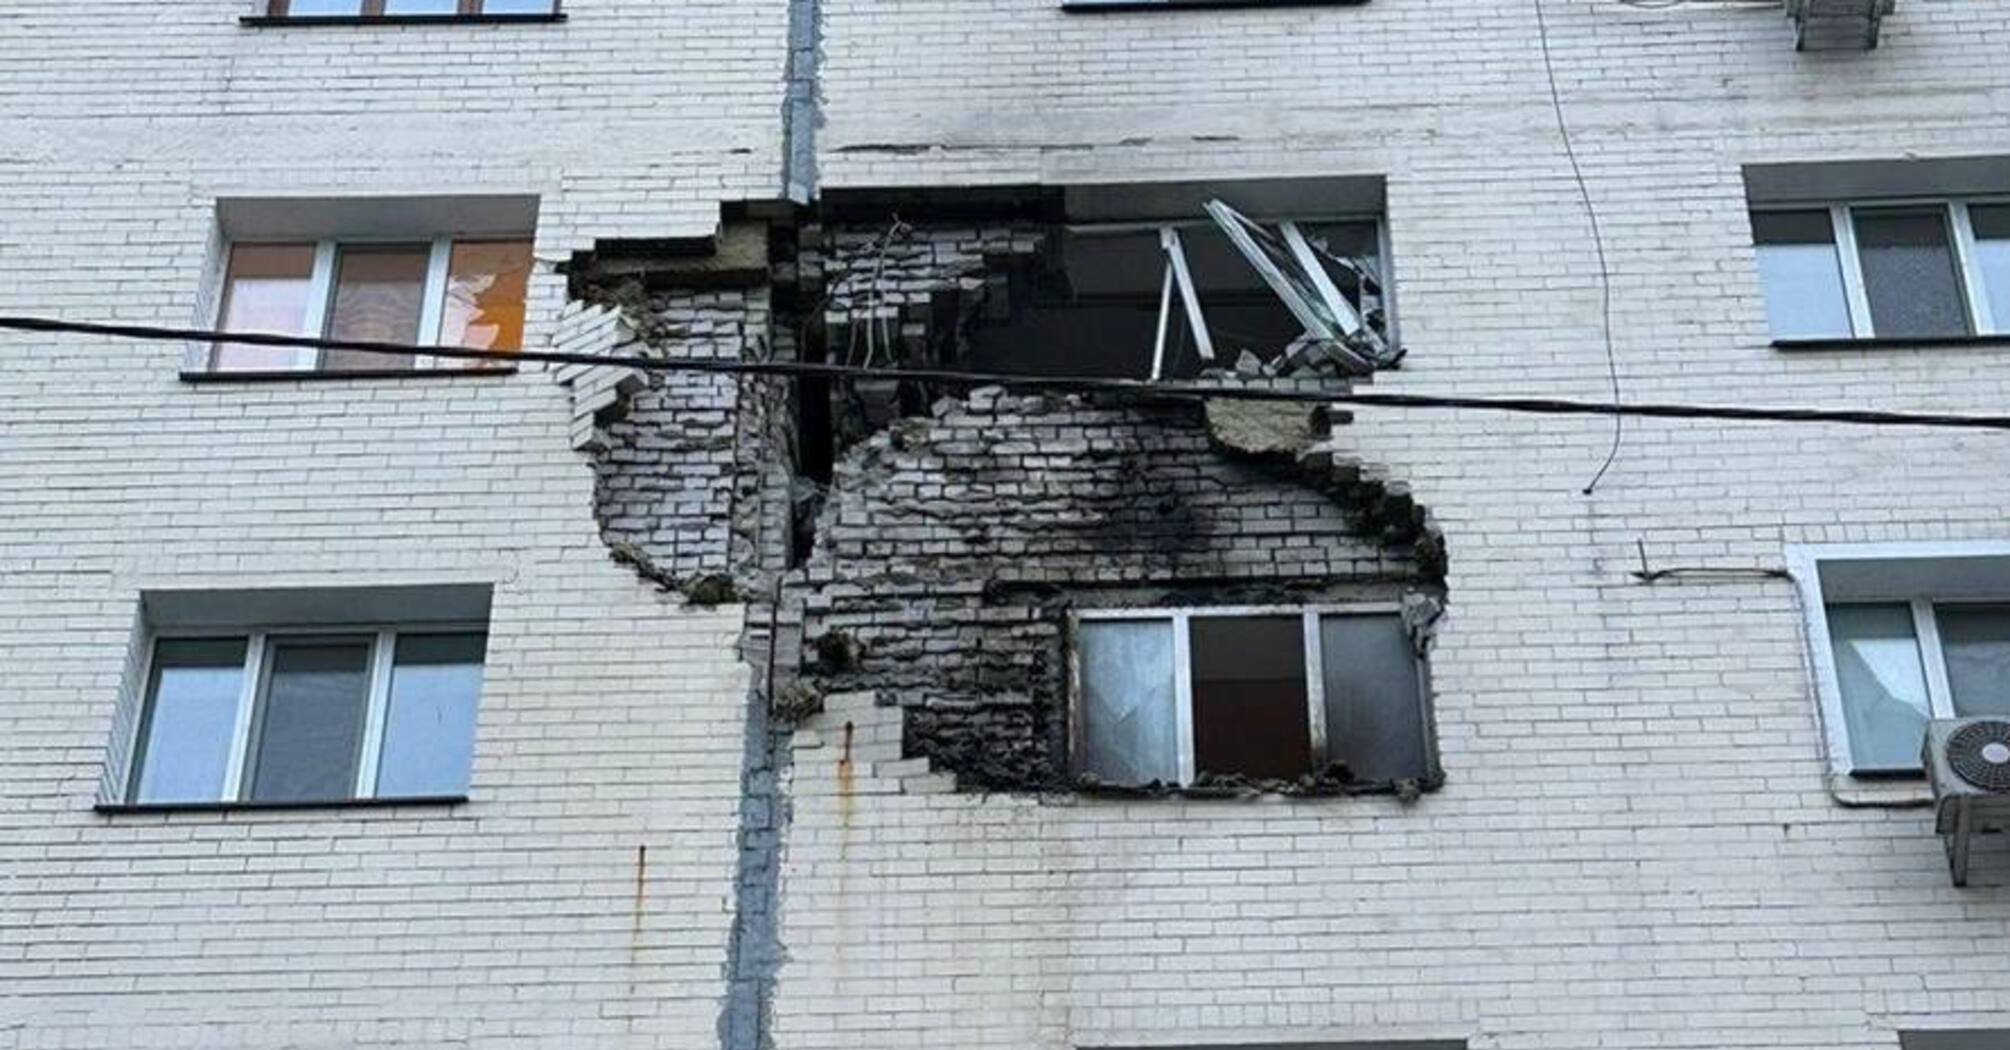 A child is injured: rocket fragments damaged a high-rise building in Kyiv region of Ukraine (photos)